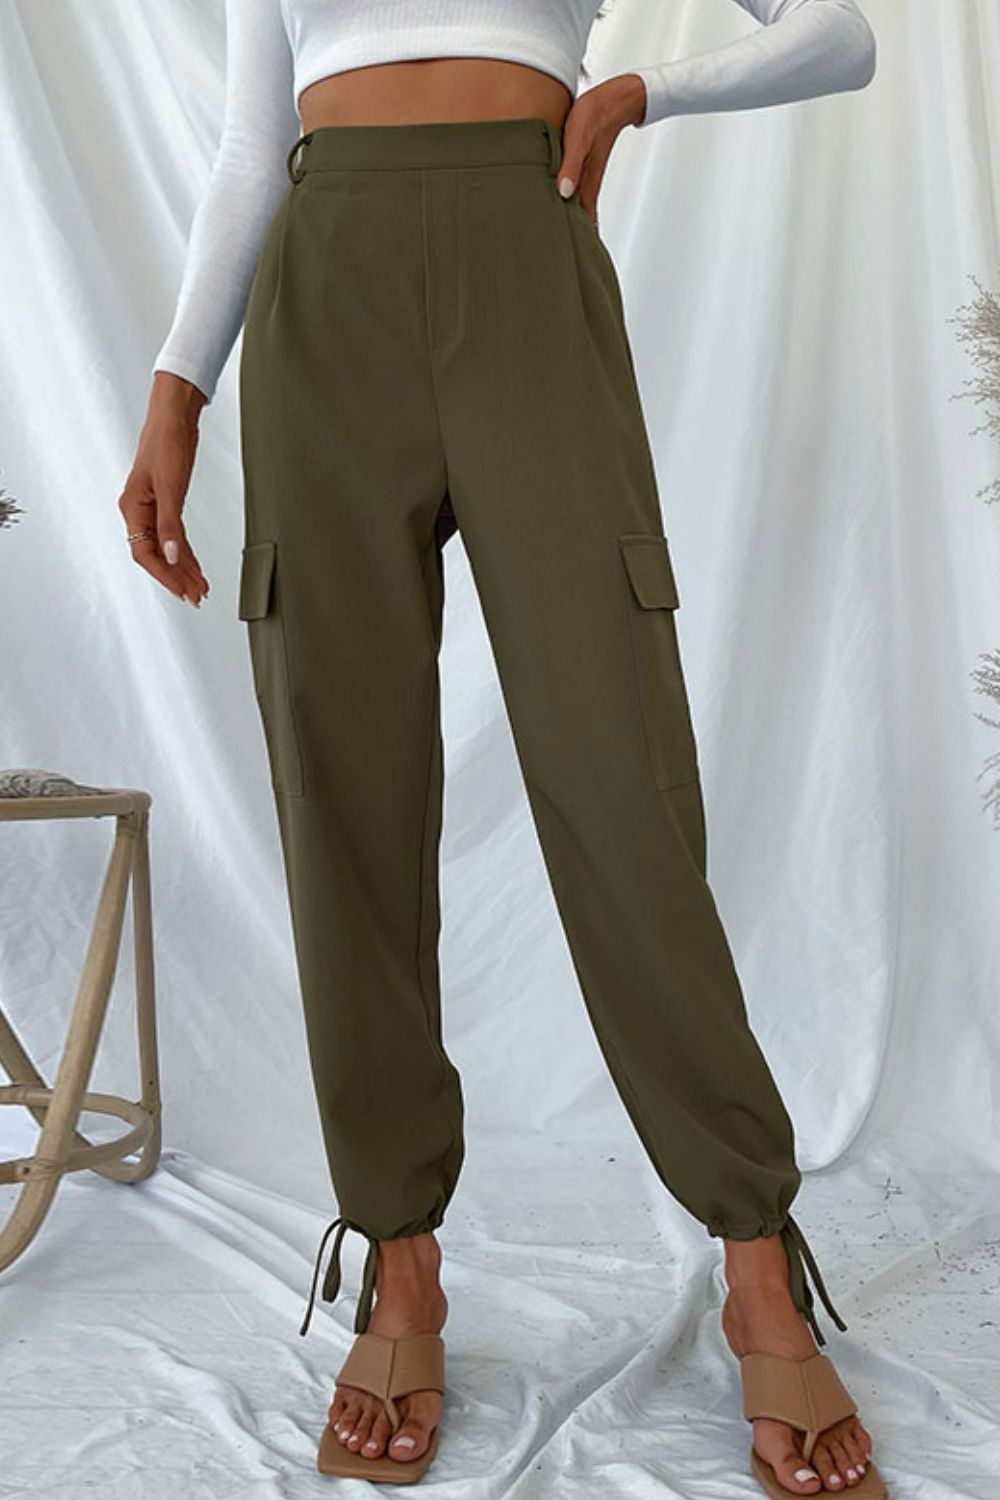 Drawstring Ankle Cargo Pants  Sunset and Swim Army Green S 